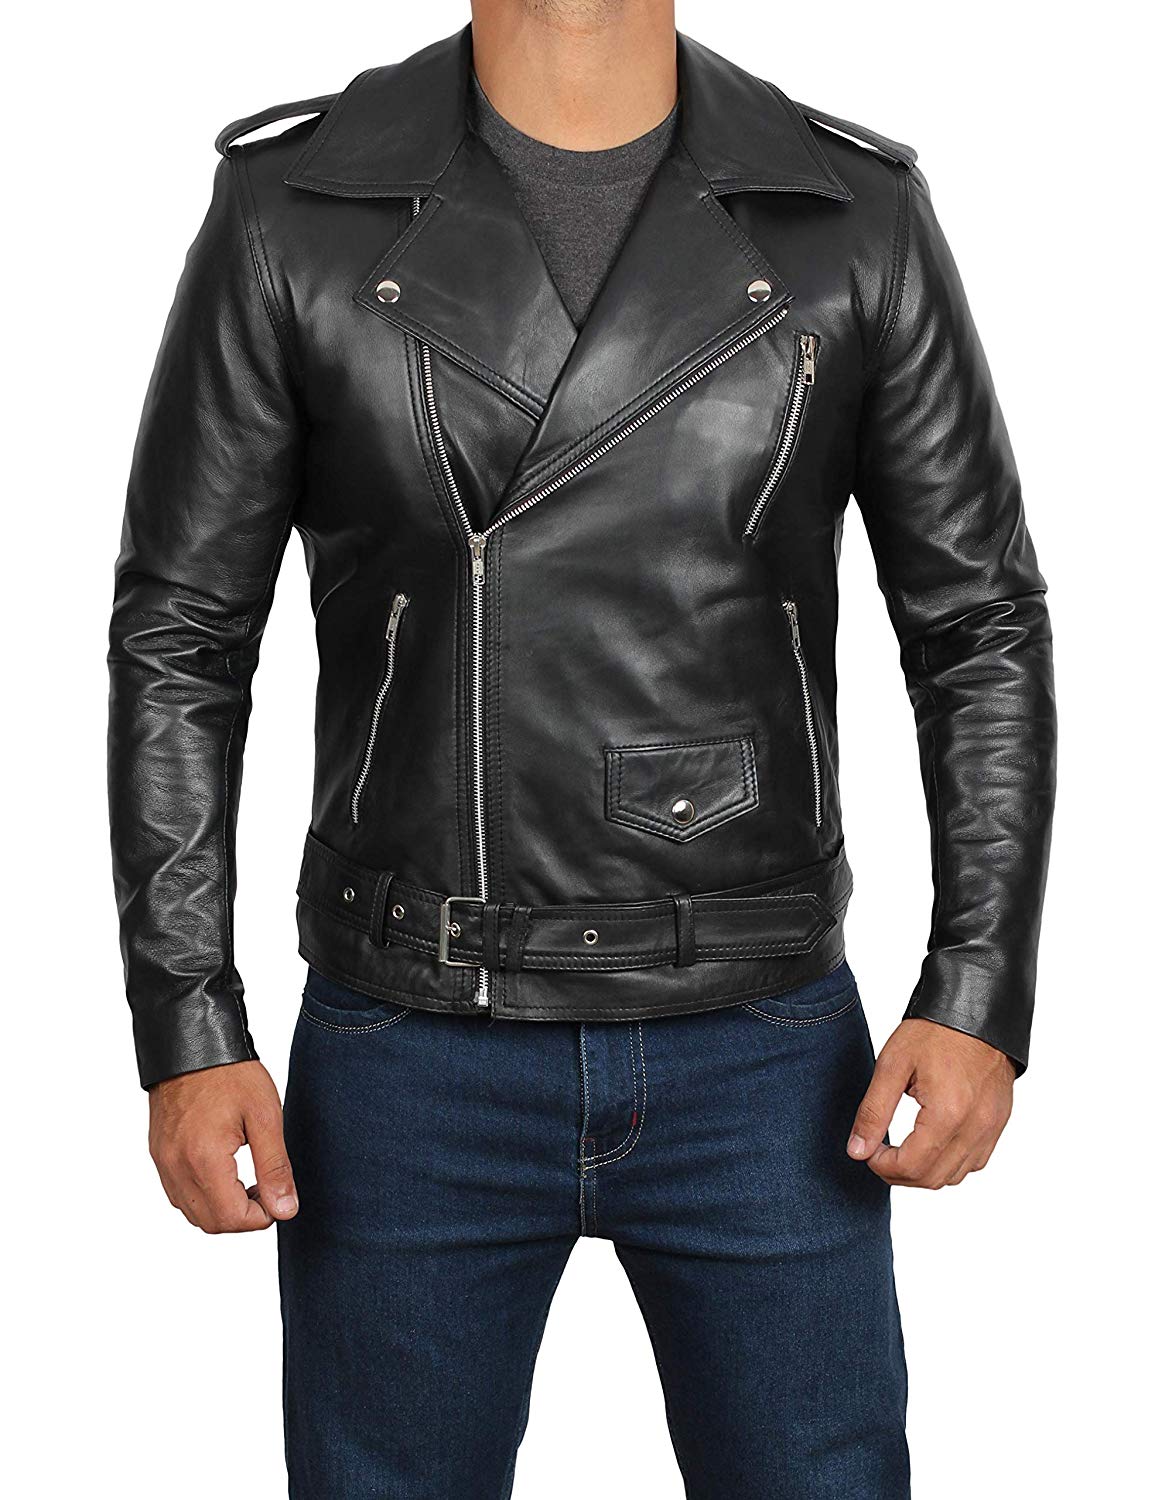 Black Real Leather Jacket Mens | $99.99 | Real Leather